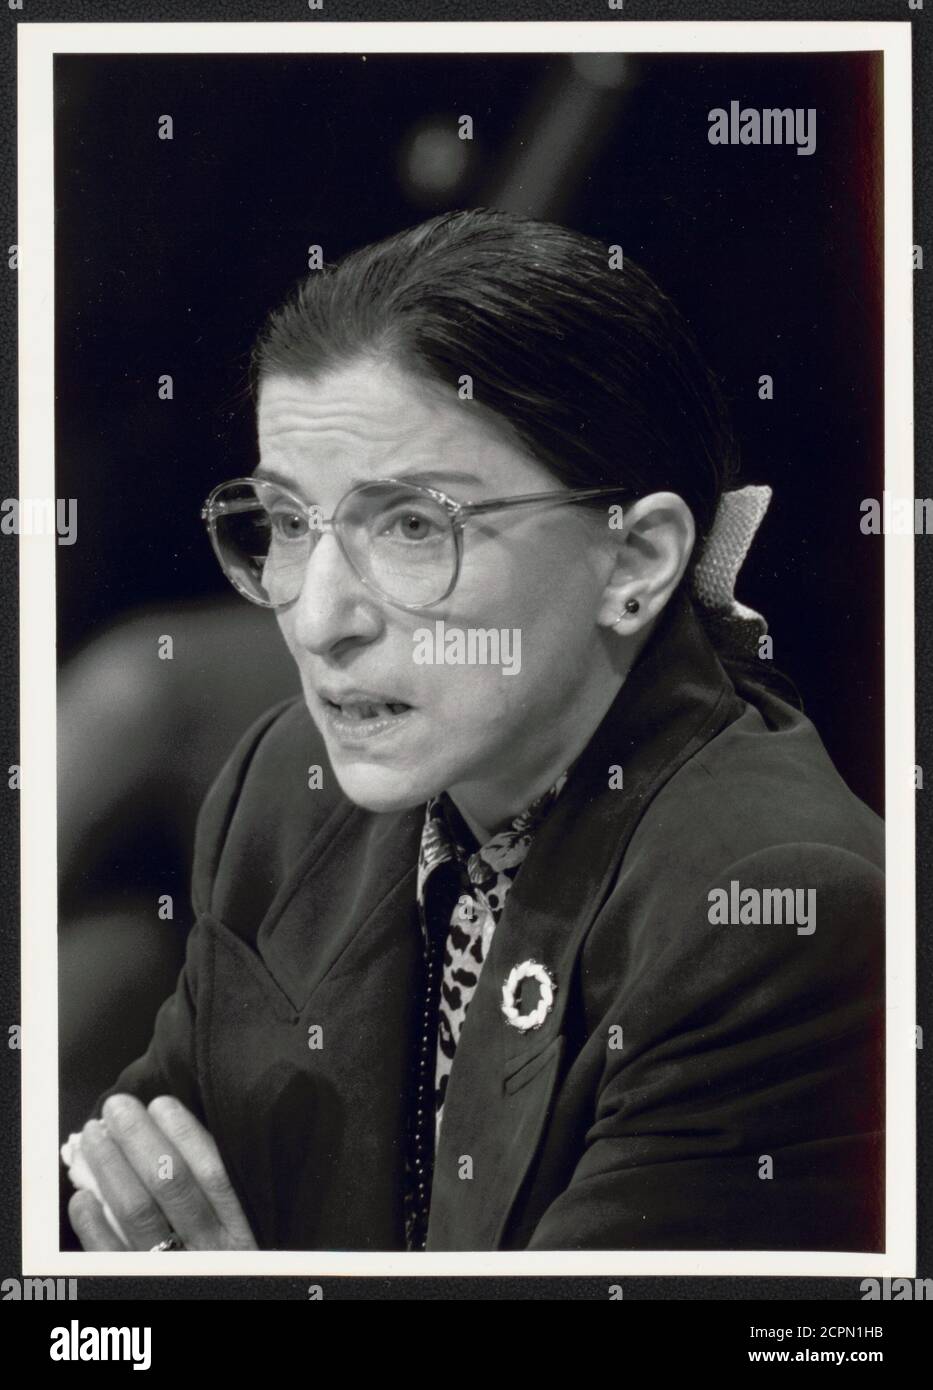 Ruth Bader Ginsburg testifies before the United States Senate Judiciary Committee hearing for her appointment to the Supreme Court, Washington, DC, 7/20/1993. (Photo by Michael R Jenkins/Congressional Quarterly/RBM Vintage Images) Stock Photo